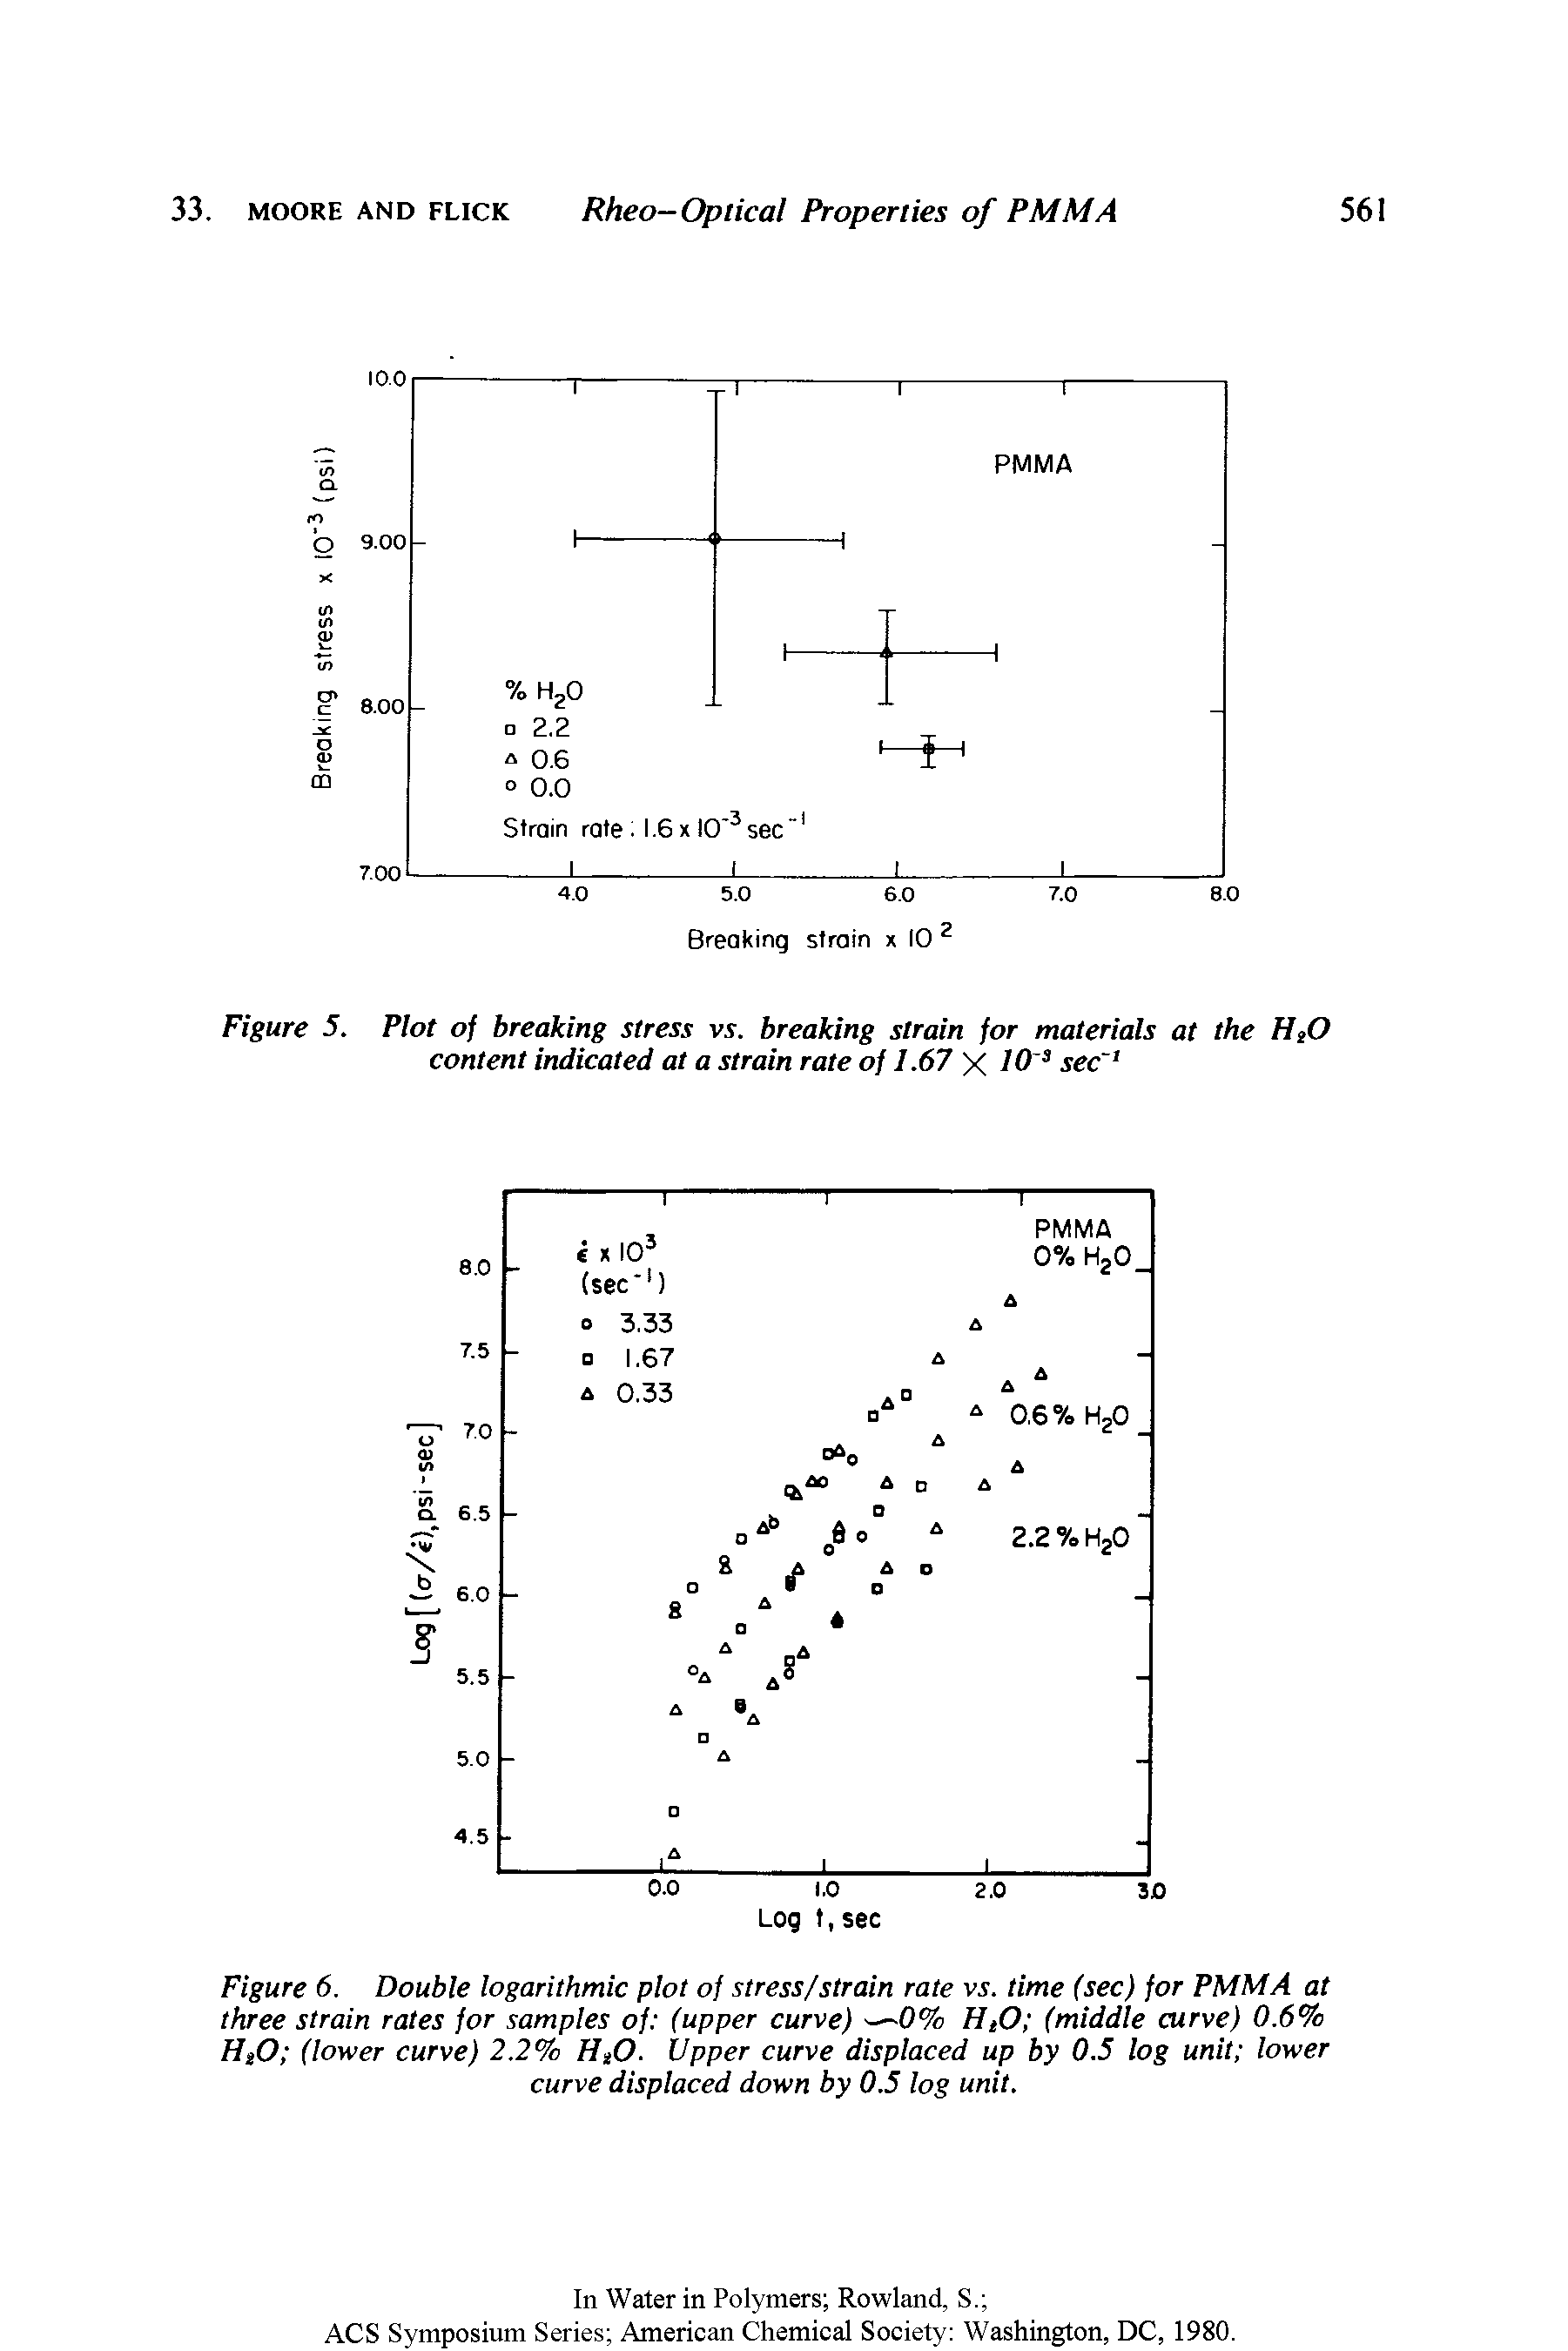 Figure 6. Double logarithmic plot of stress/strain rate vs. time (sec) for PMMA at three strain rates for samples of (upper curve) — 0% HtO (middle curve) 0.6% HtO (lower curve) 2.2% HtO. Upper curve displaced up by 0.5 log unit lower curve displaced down by 0.5 log unit.